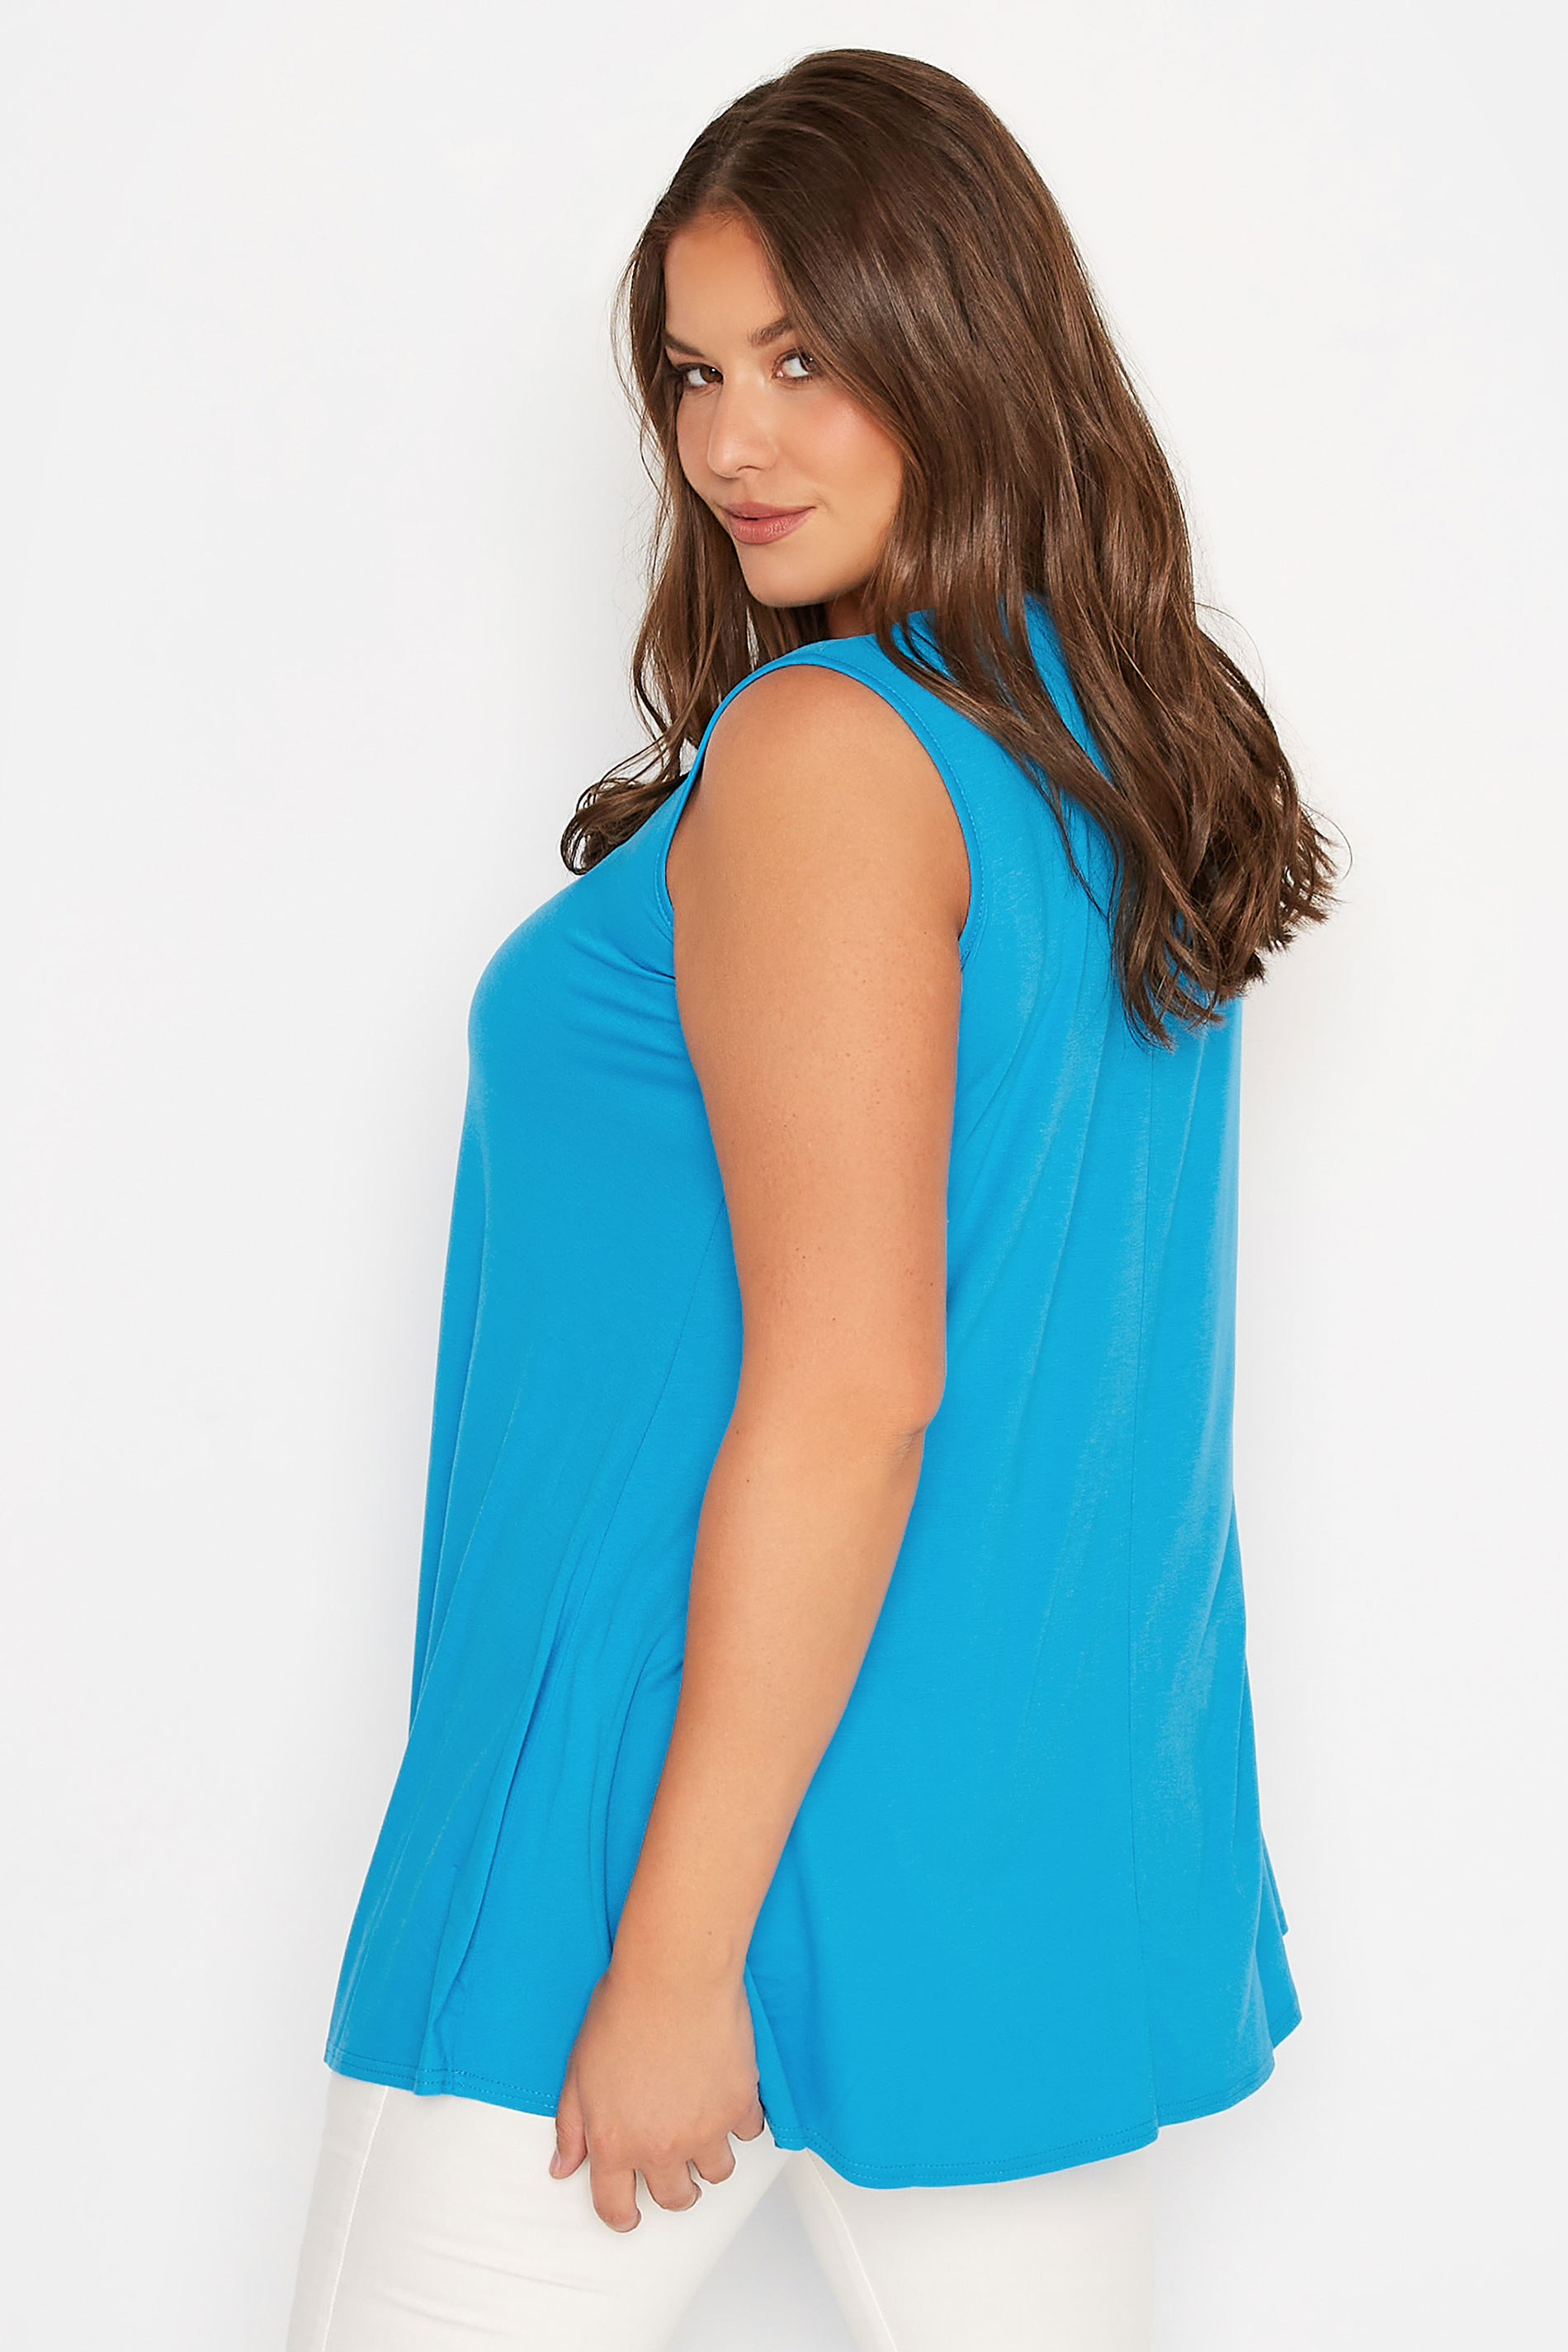 Grande taille  Tops Grande taille  Tops Casual | Curve Turquoise Blue Swing Vest Top - EK95463